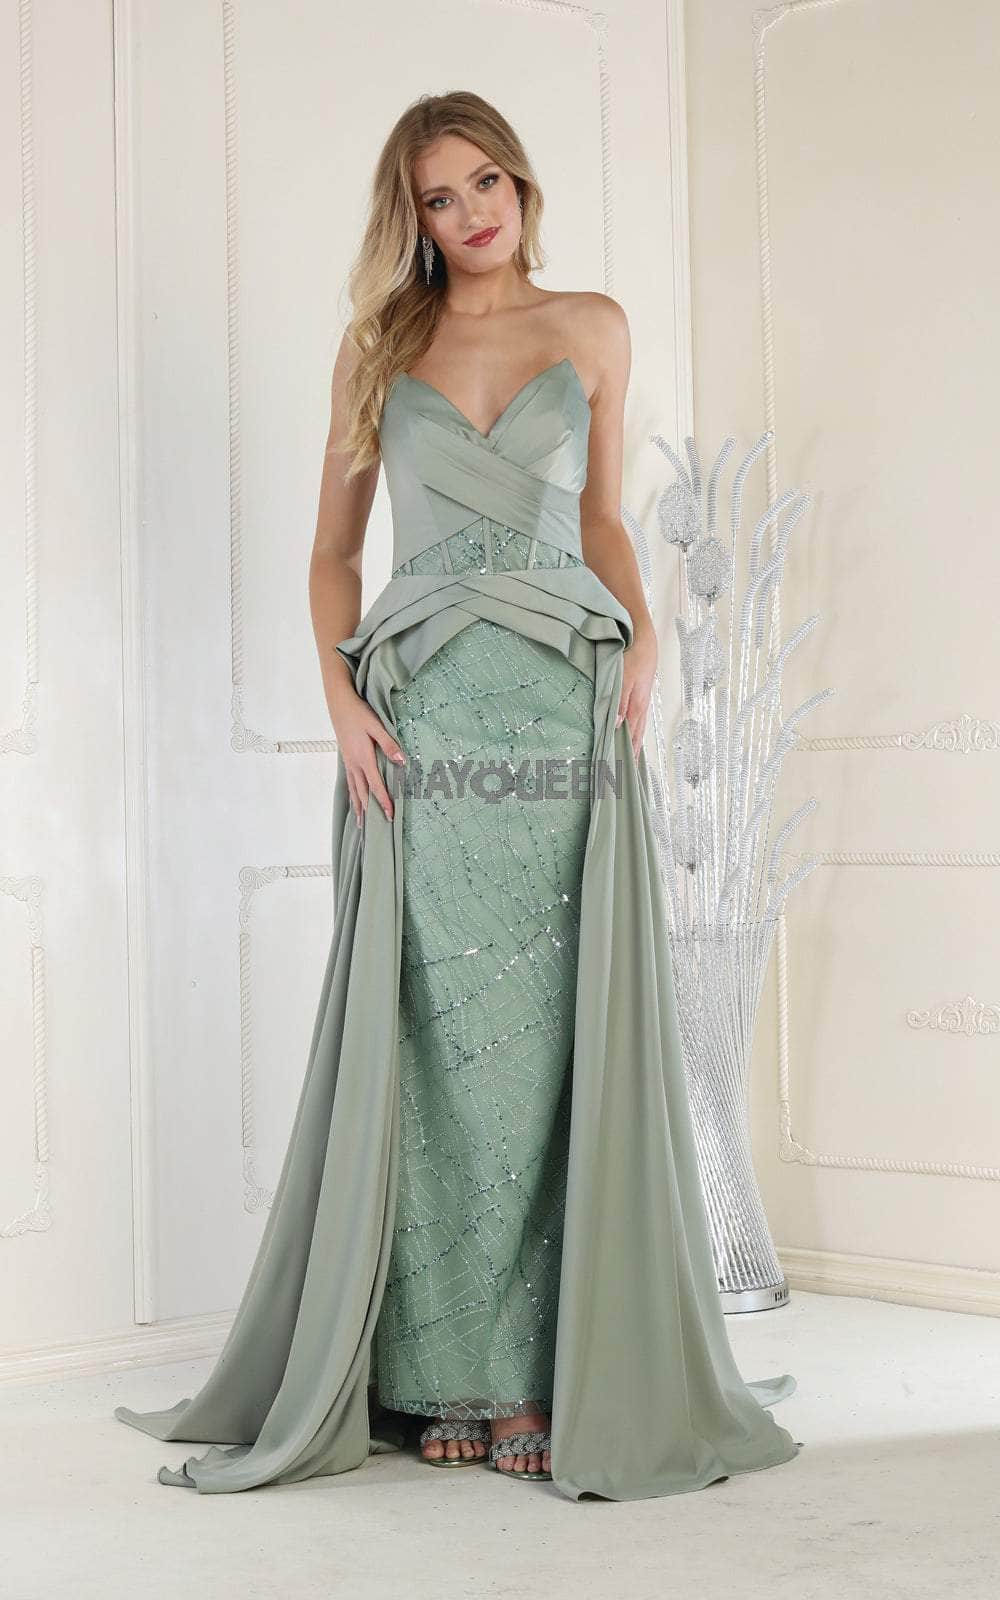 May Queen RQ8001 - Strapless V Sweetheart Long Gown Special Occasion Dress